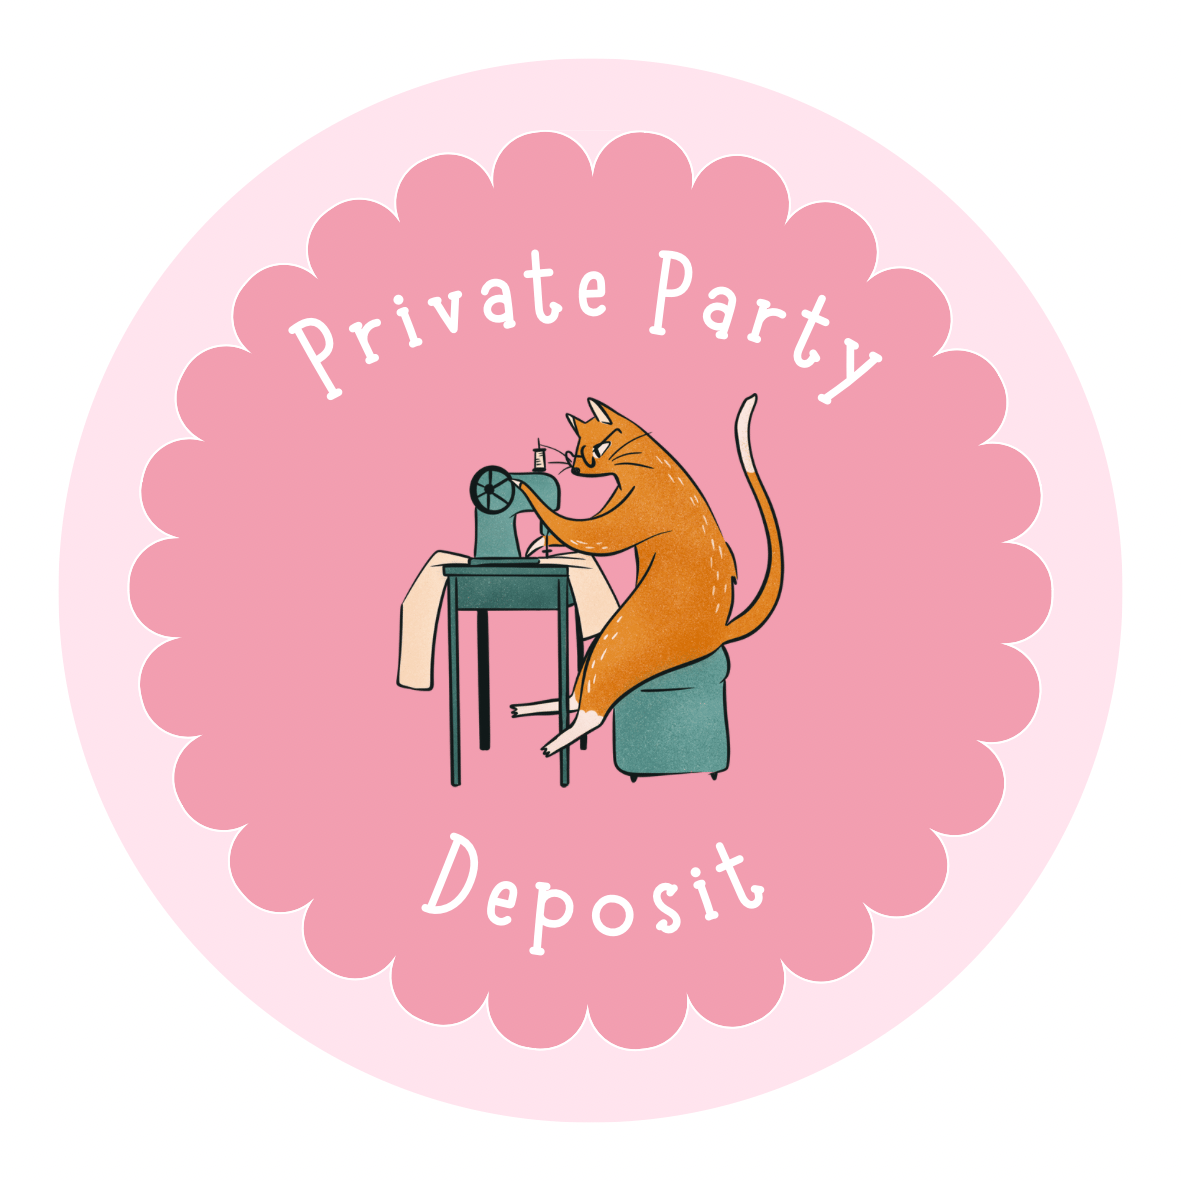 Image of Private Party Deposits